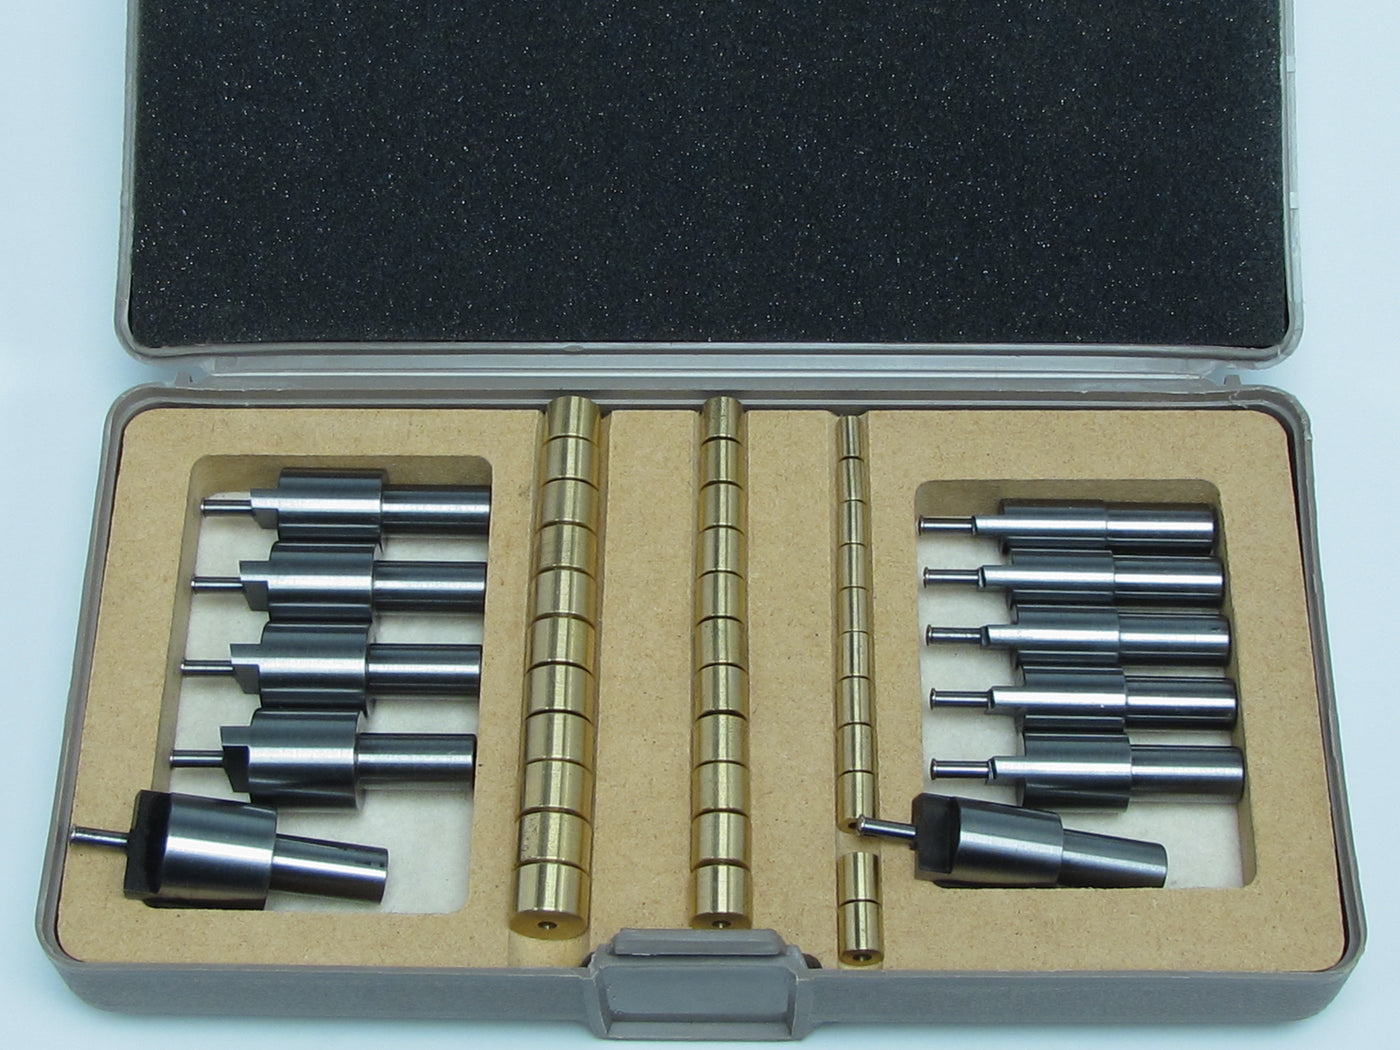 G86 Clarinet Tone Hole Replacement Cutter Set – Ferree's Tools Inc